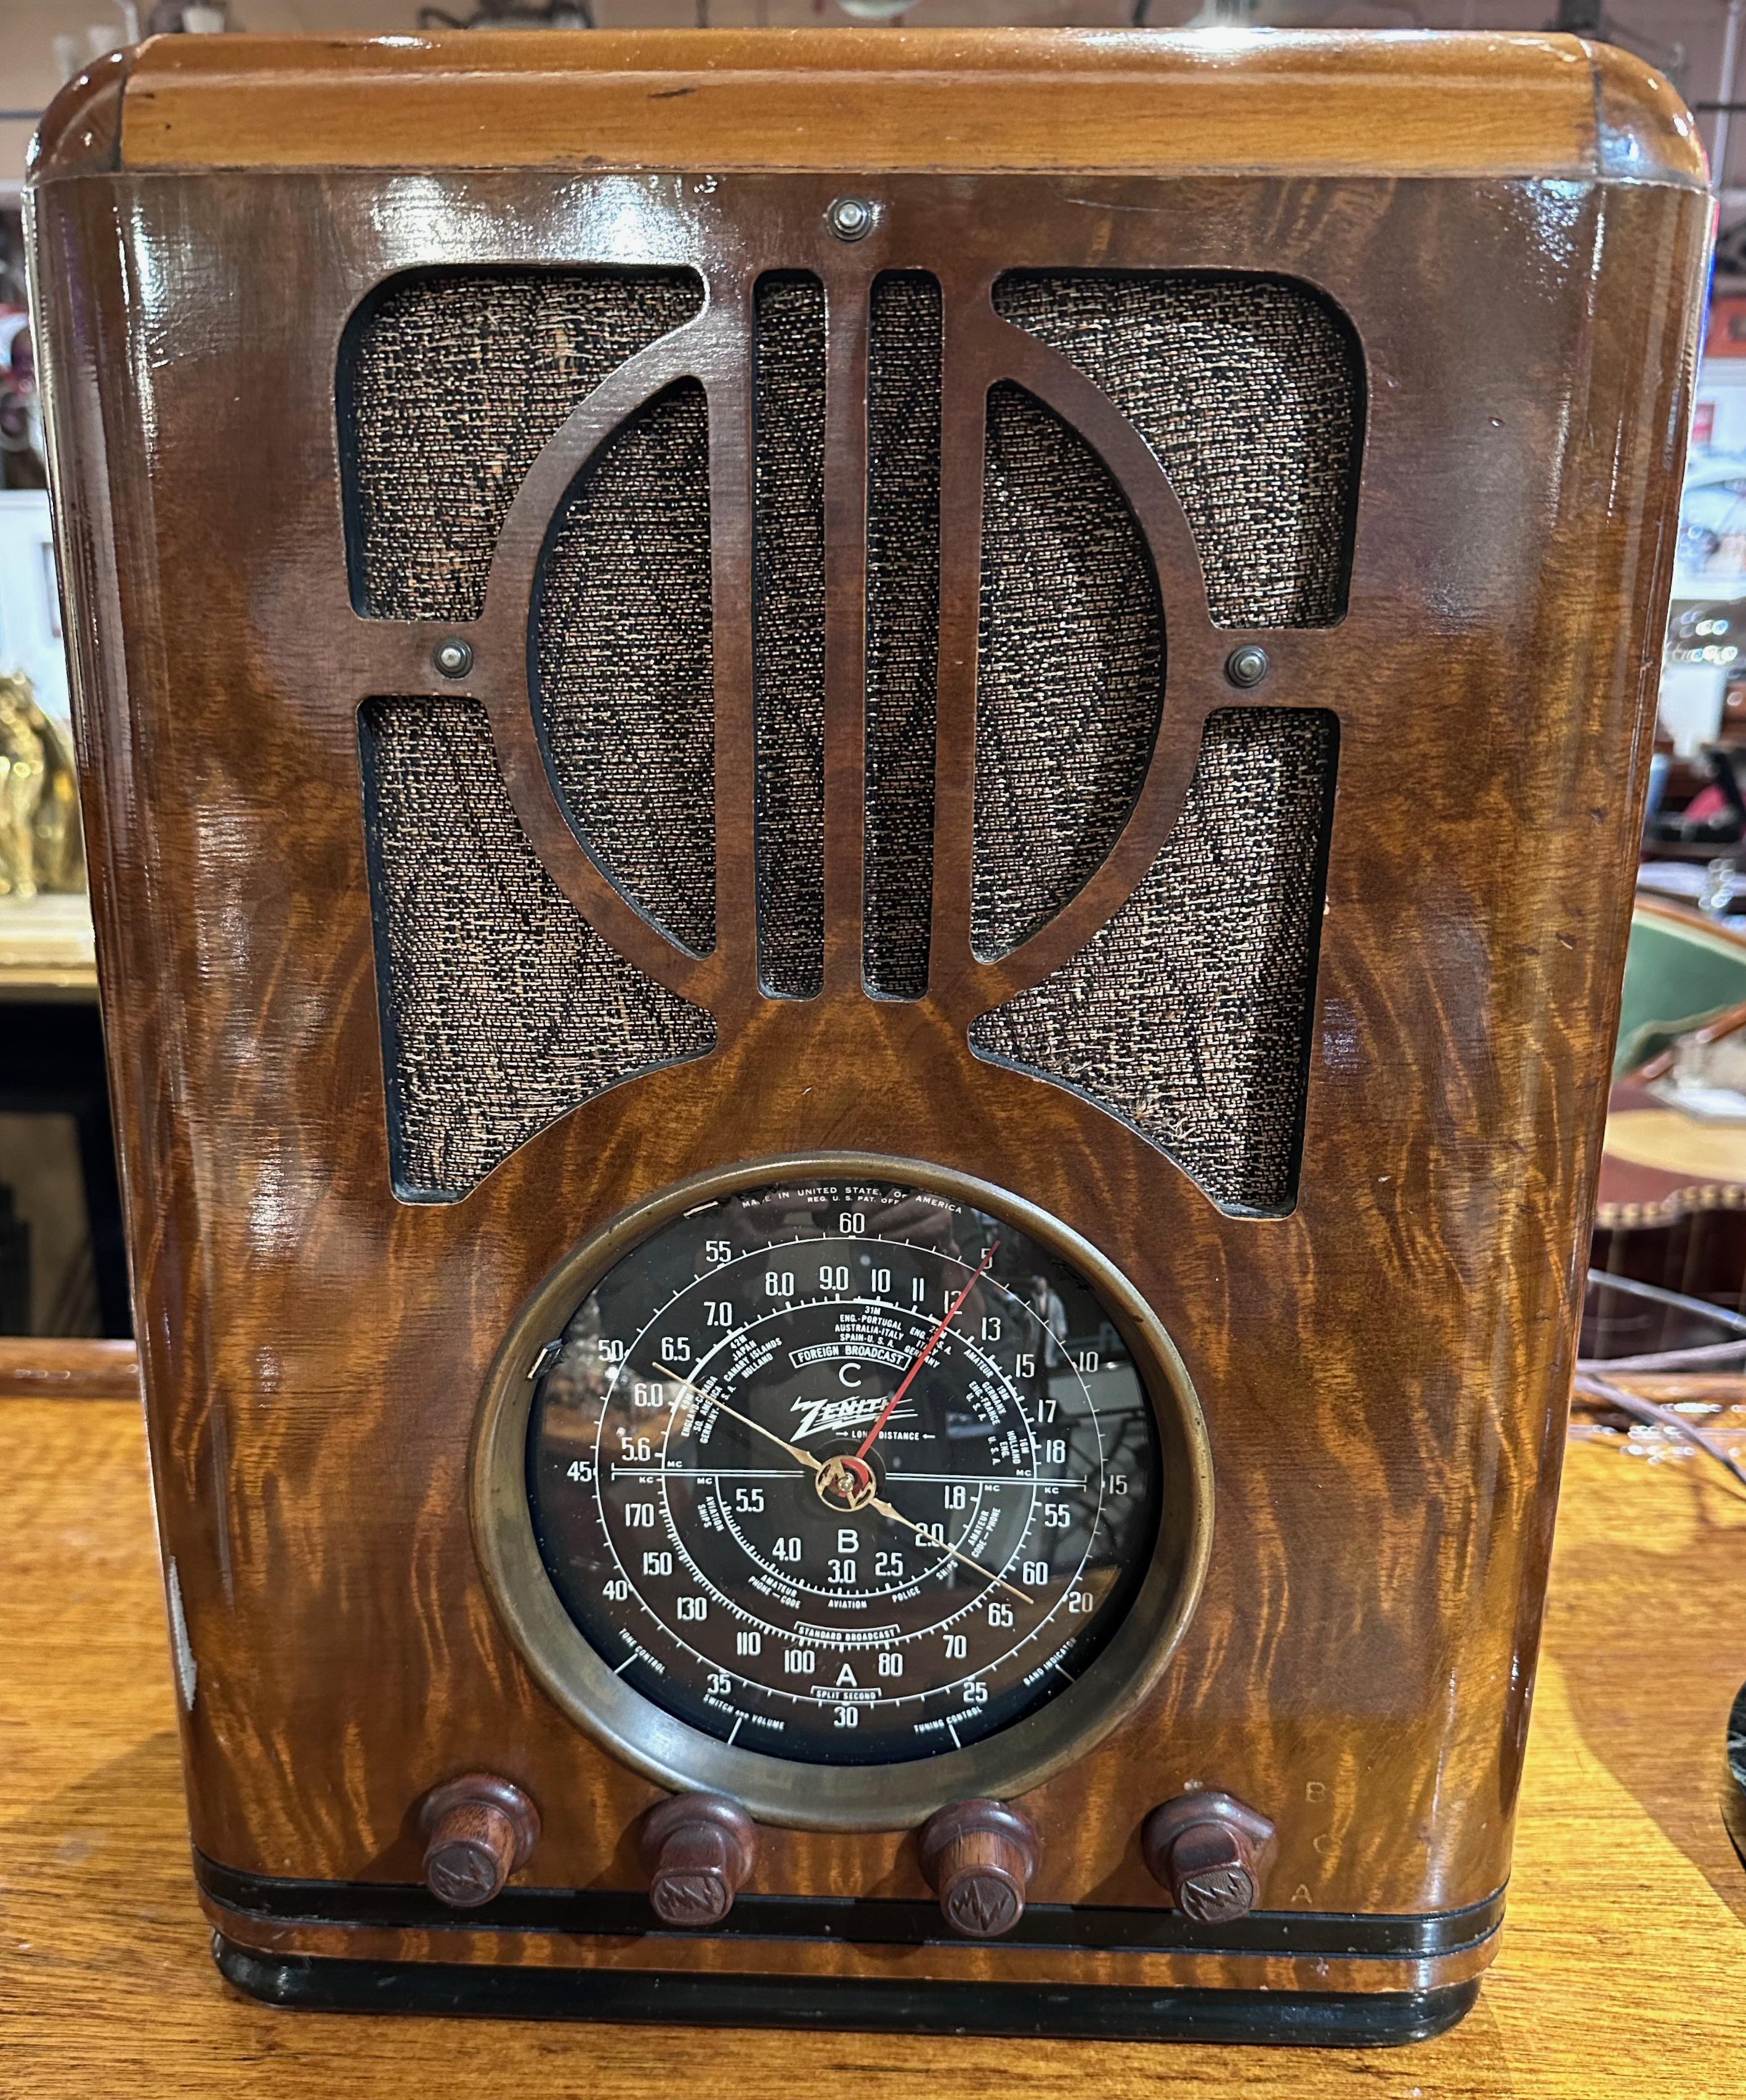 Zenith Model 6-S-229 Tombstone Radio (1938) With Adapter for Bluetooth. Zenith 6-S-229 black-dial tombstone is one of
several similar models where the front and sides of the cabinet are covered with FAUX finish, a paper-like film printed & textured